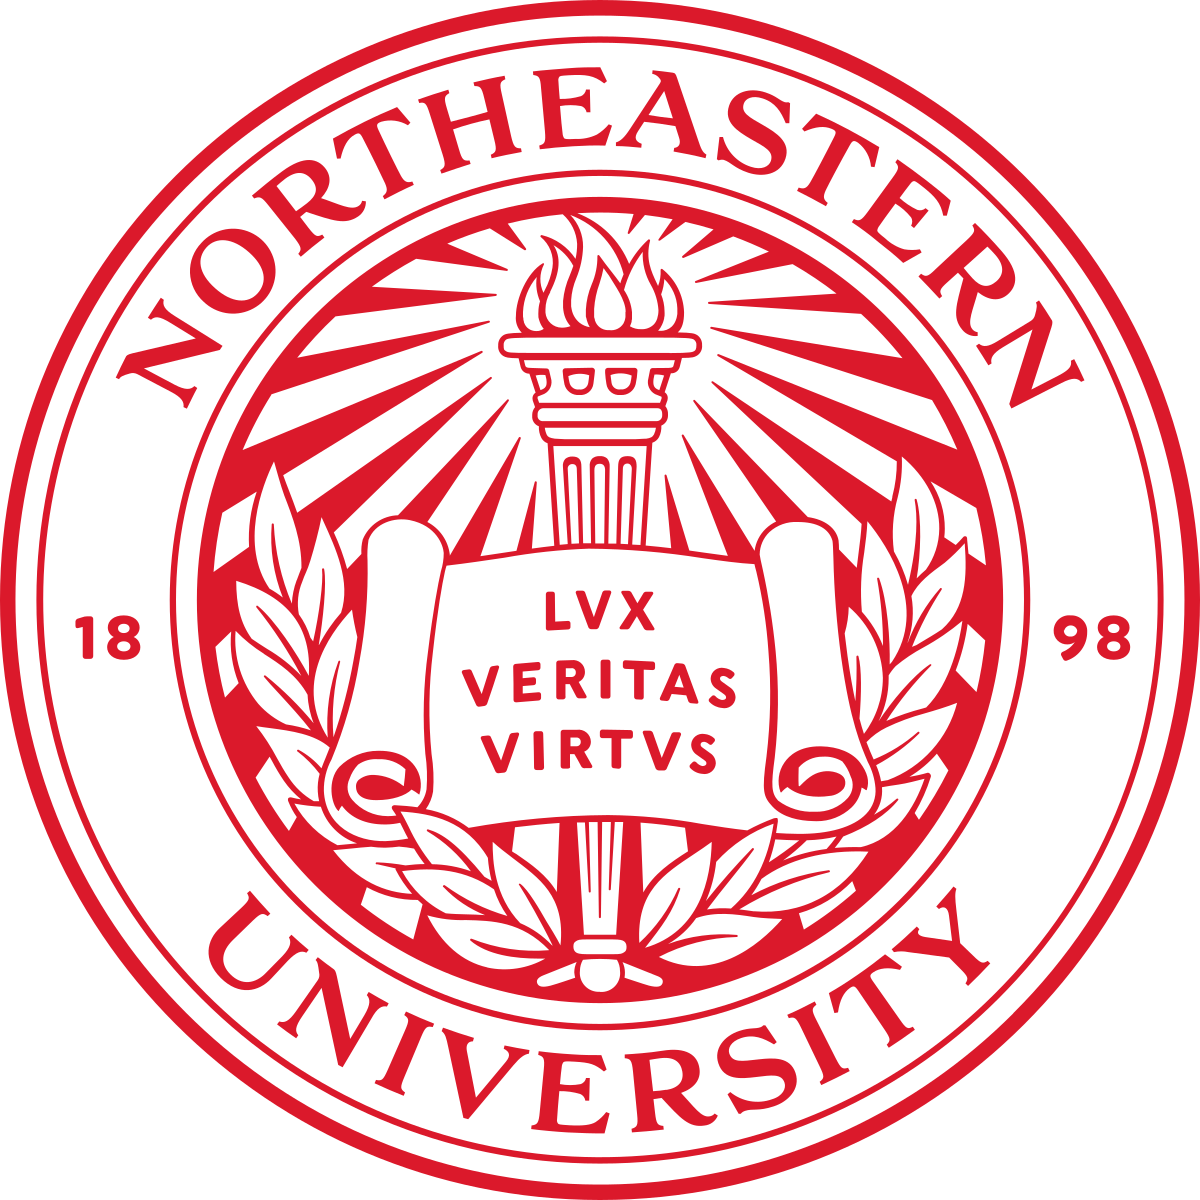 A logo of Northeastern University for our school profile